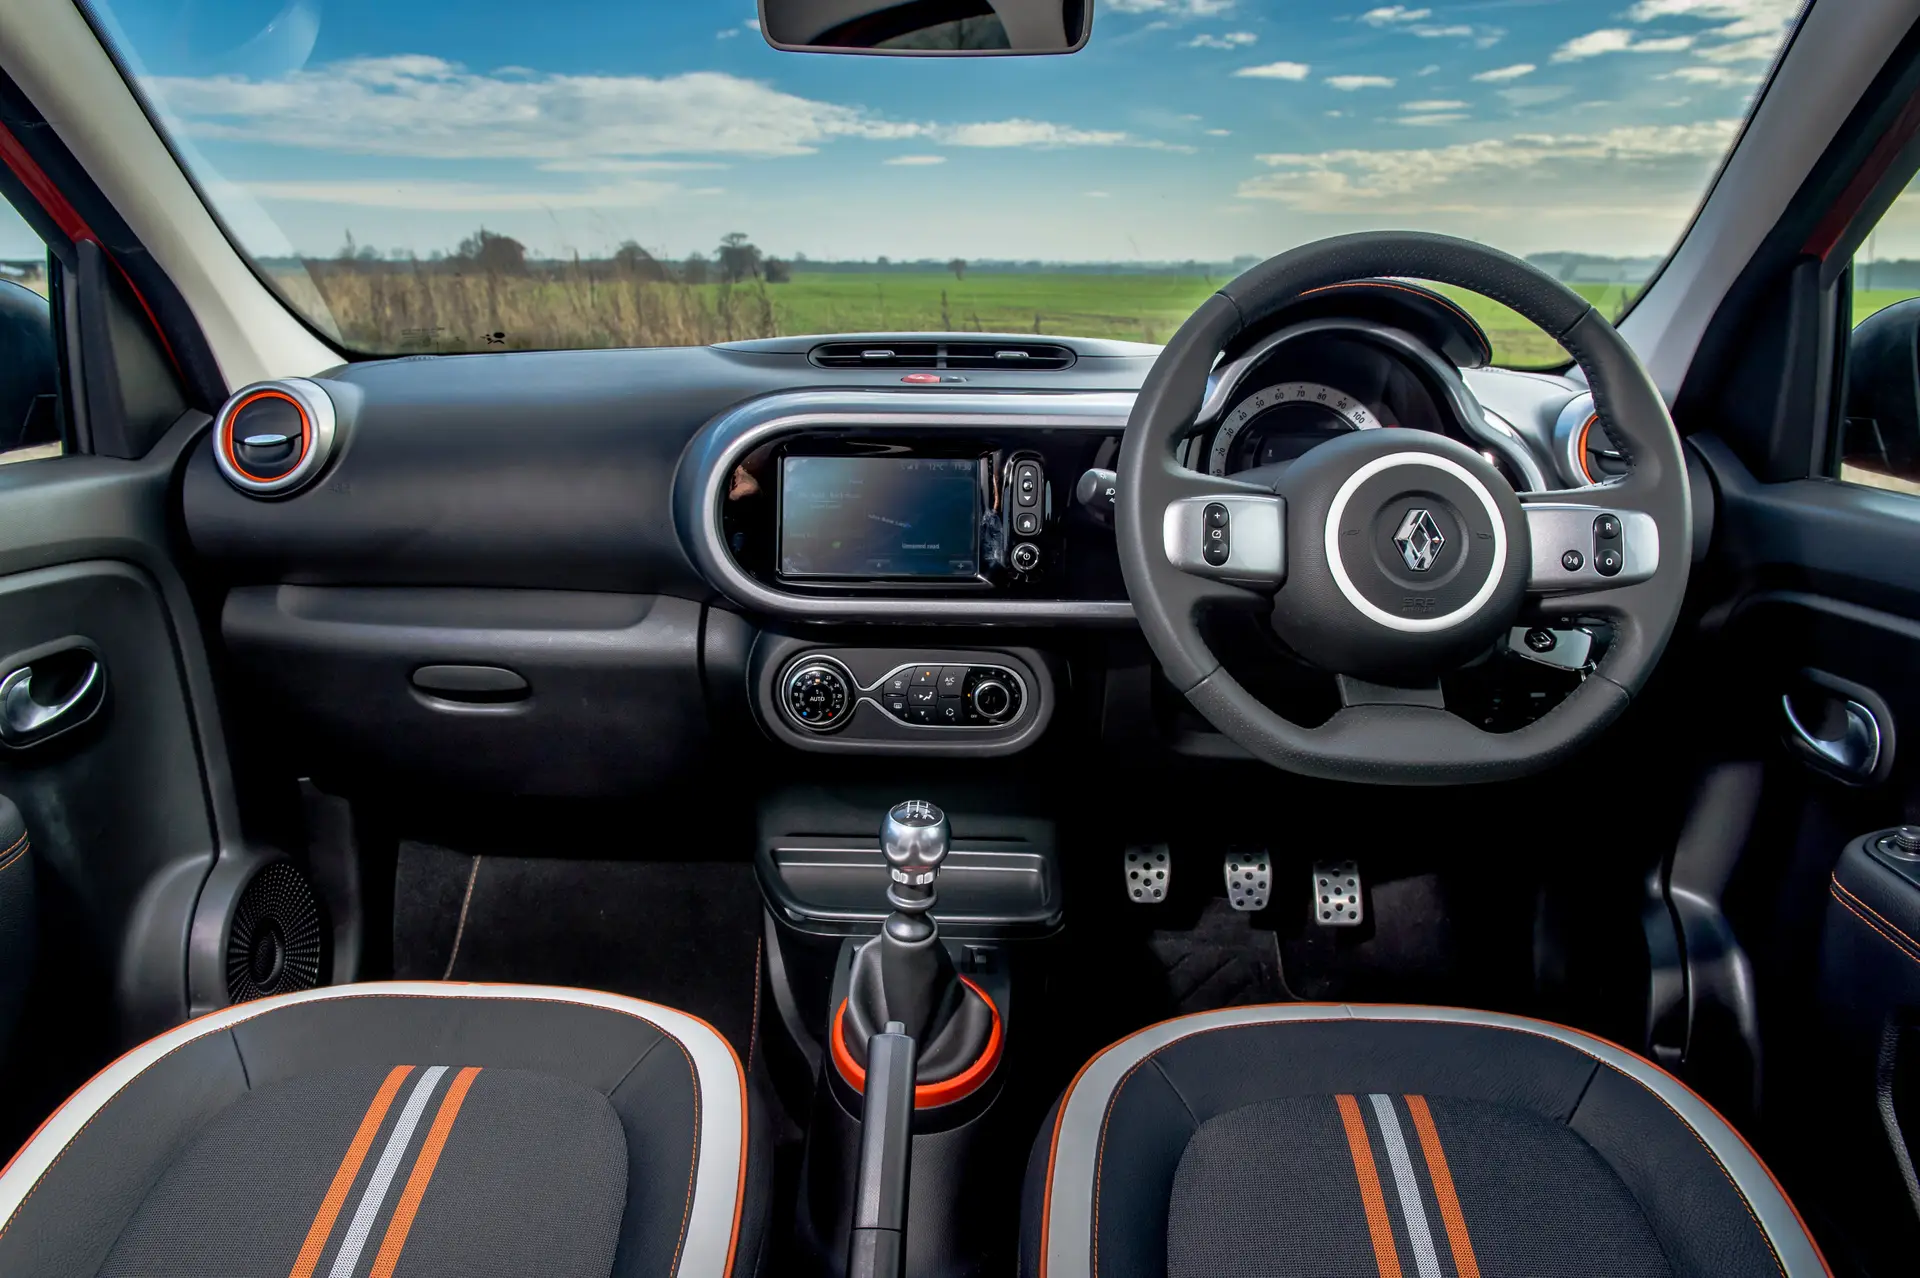 Renault Twingo (2014-2019) Review: interior close up photo of the Renault Twingo dashboard